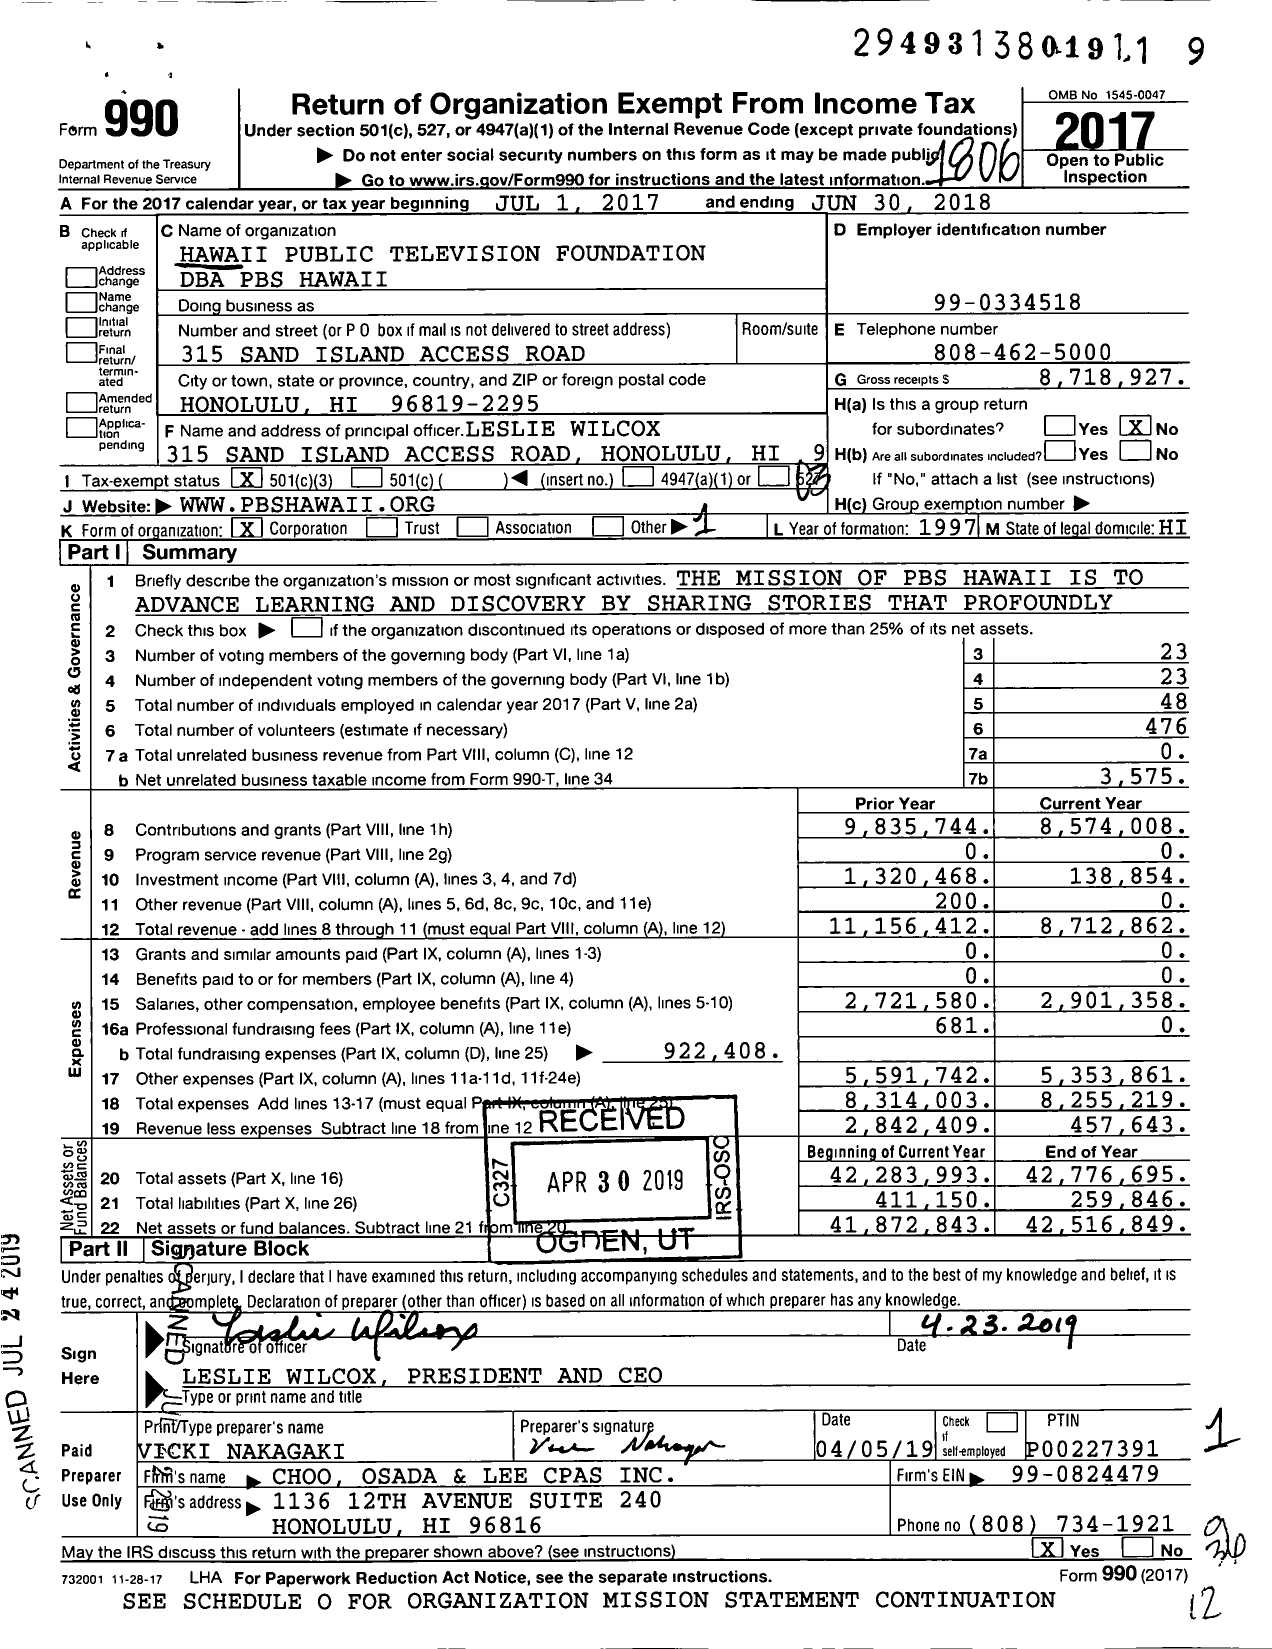 Image of first page of 2017 Form 990 for PBS Hawaii